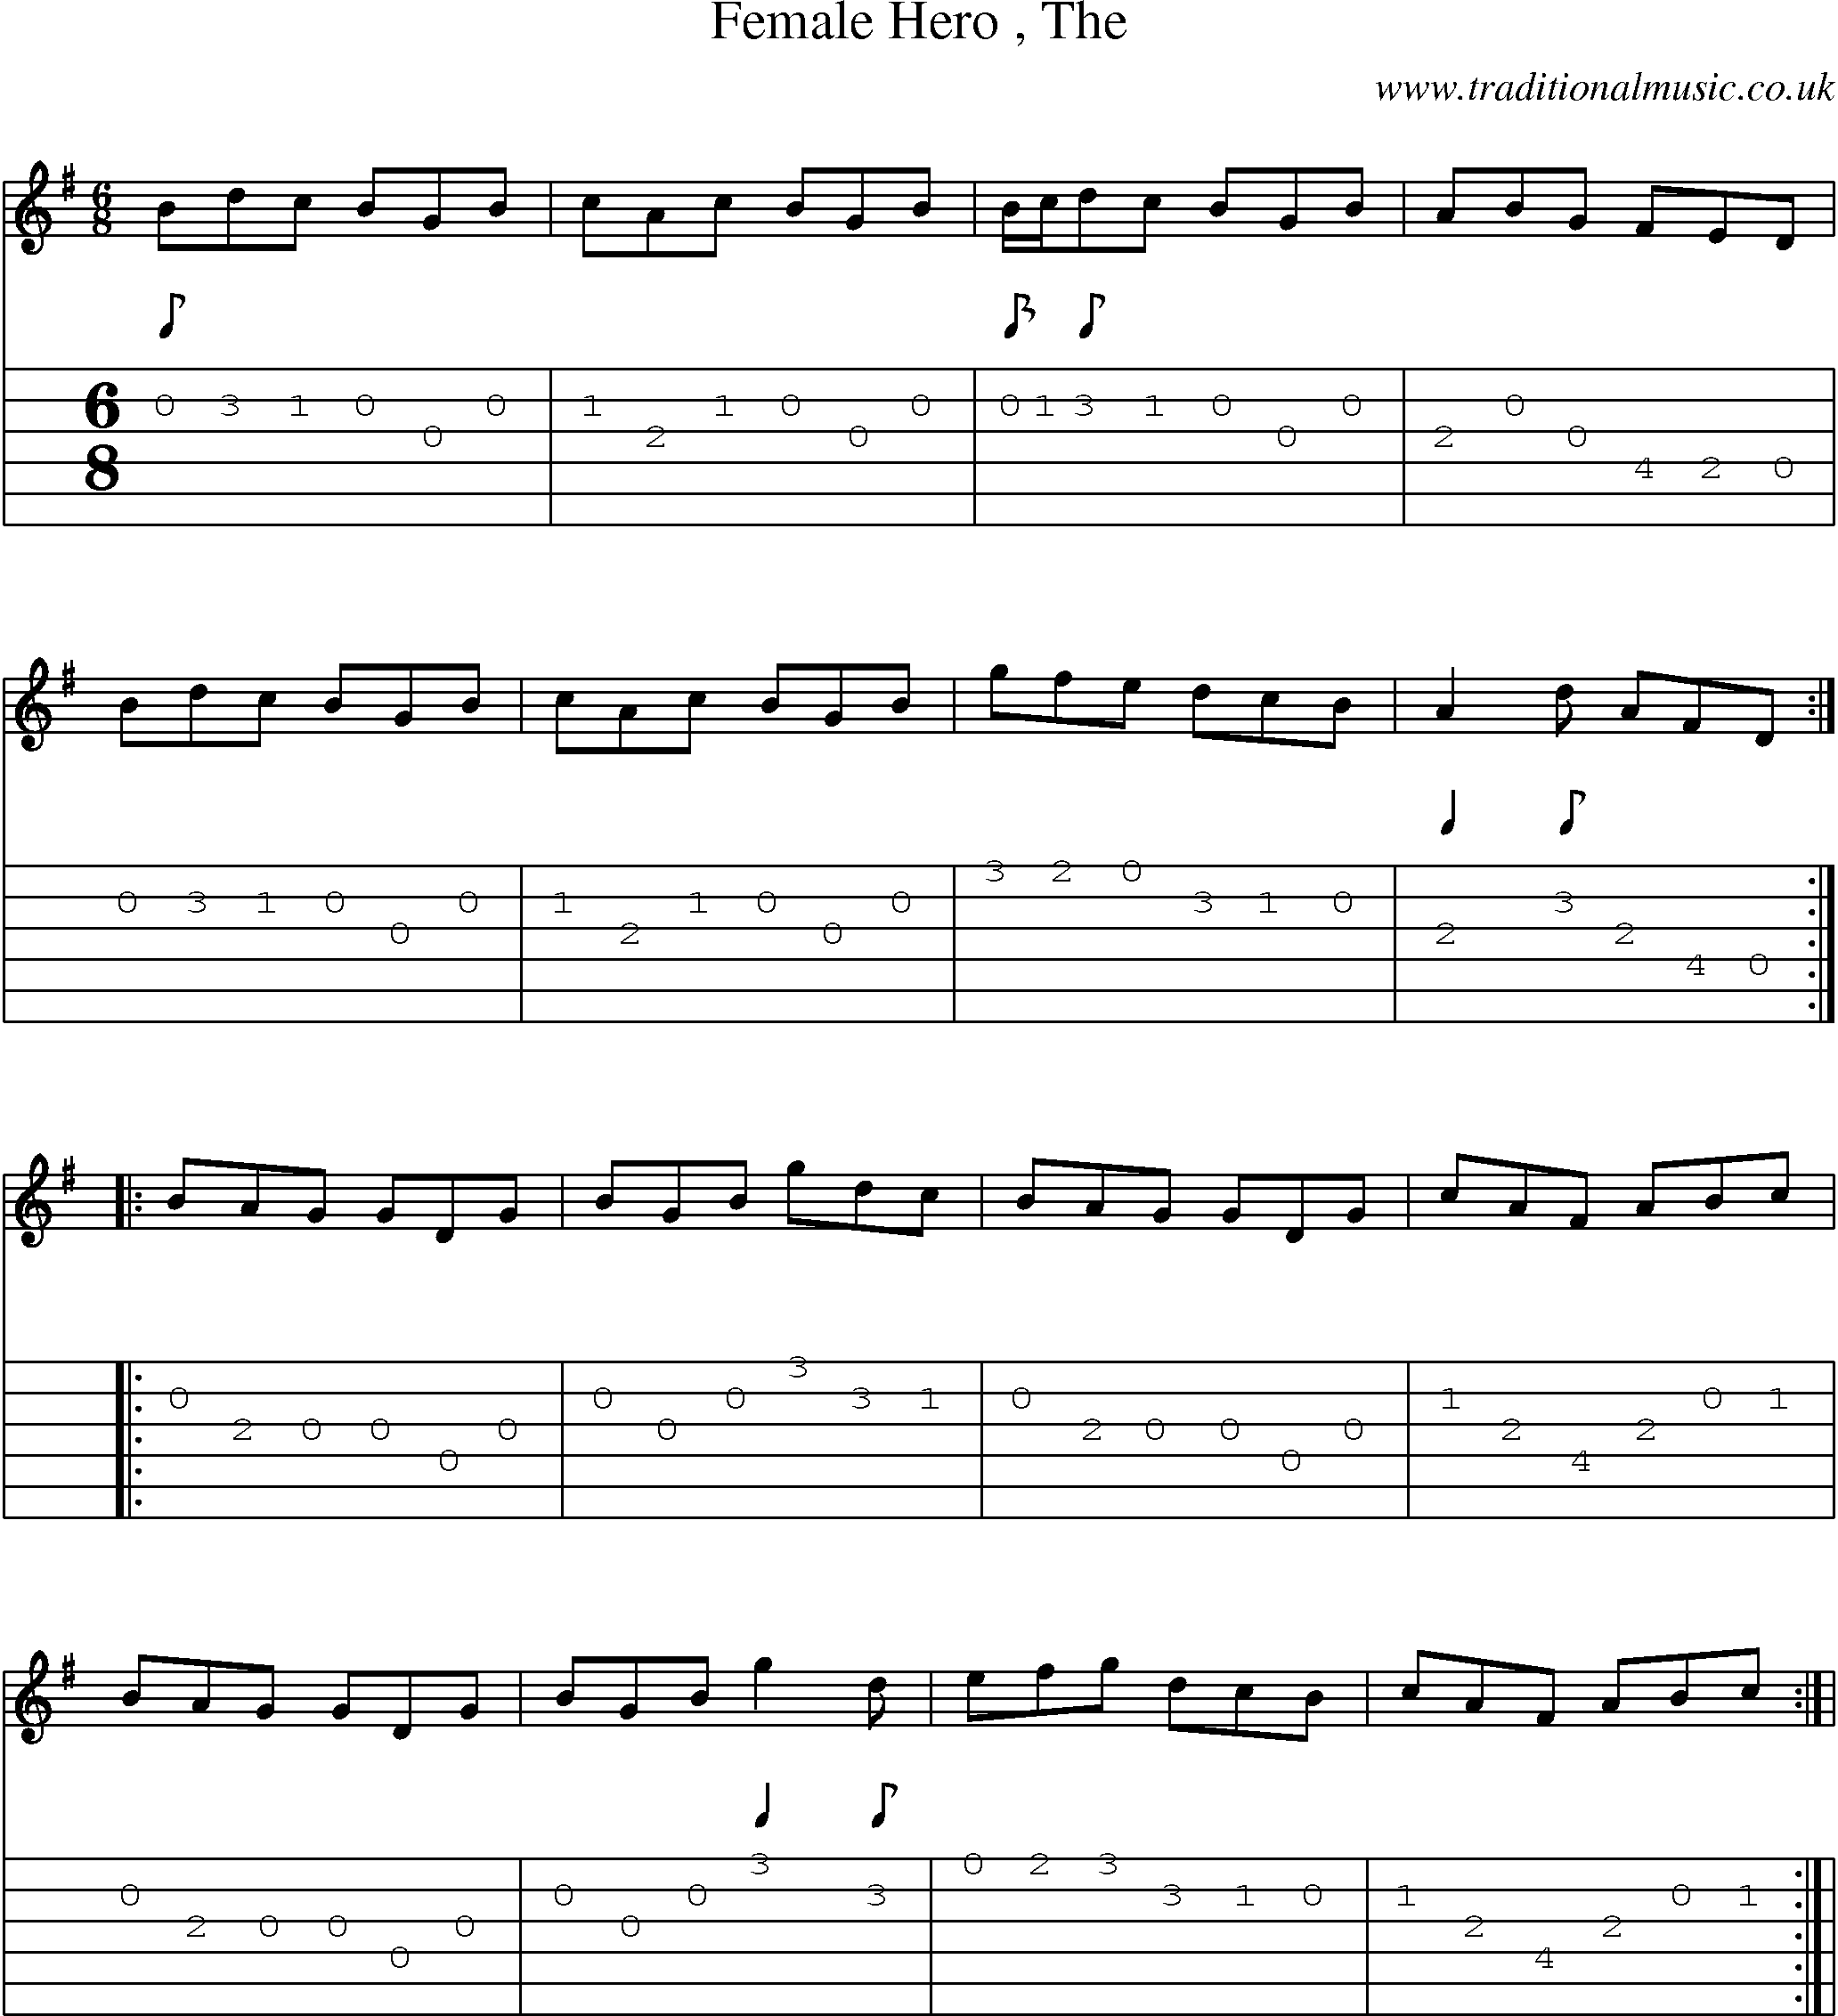 Music Score and Guitar Tabs for Female Hero